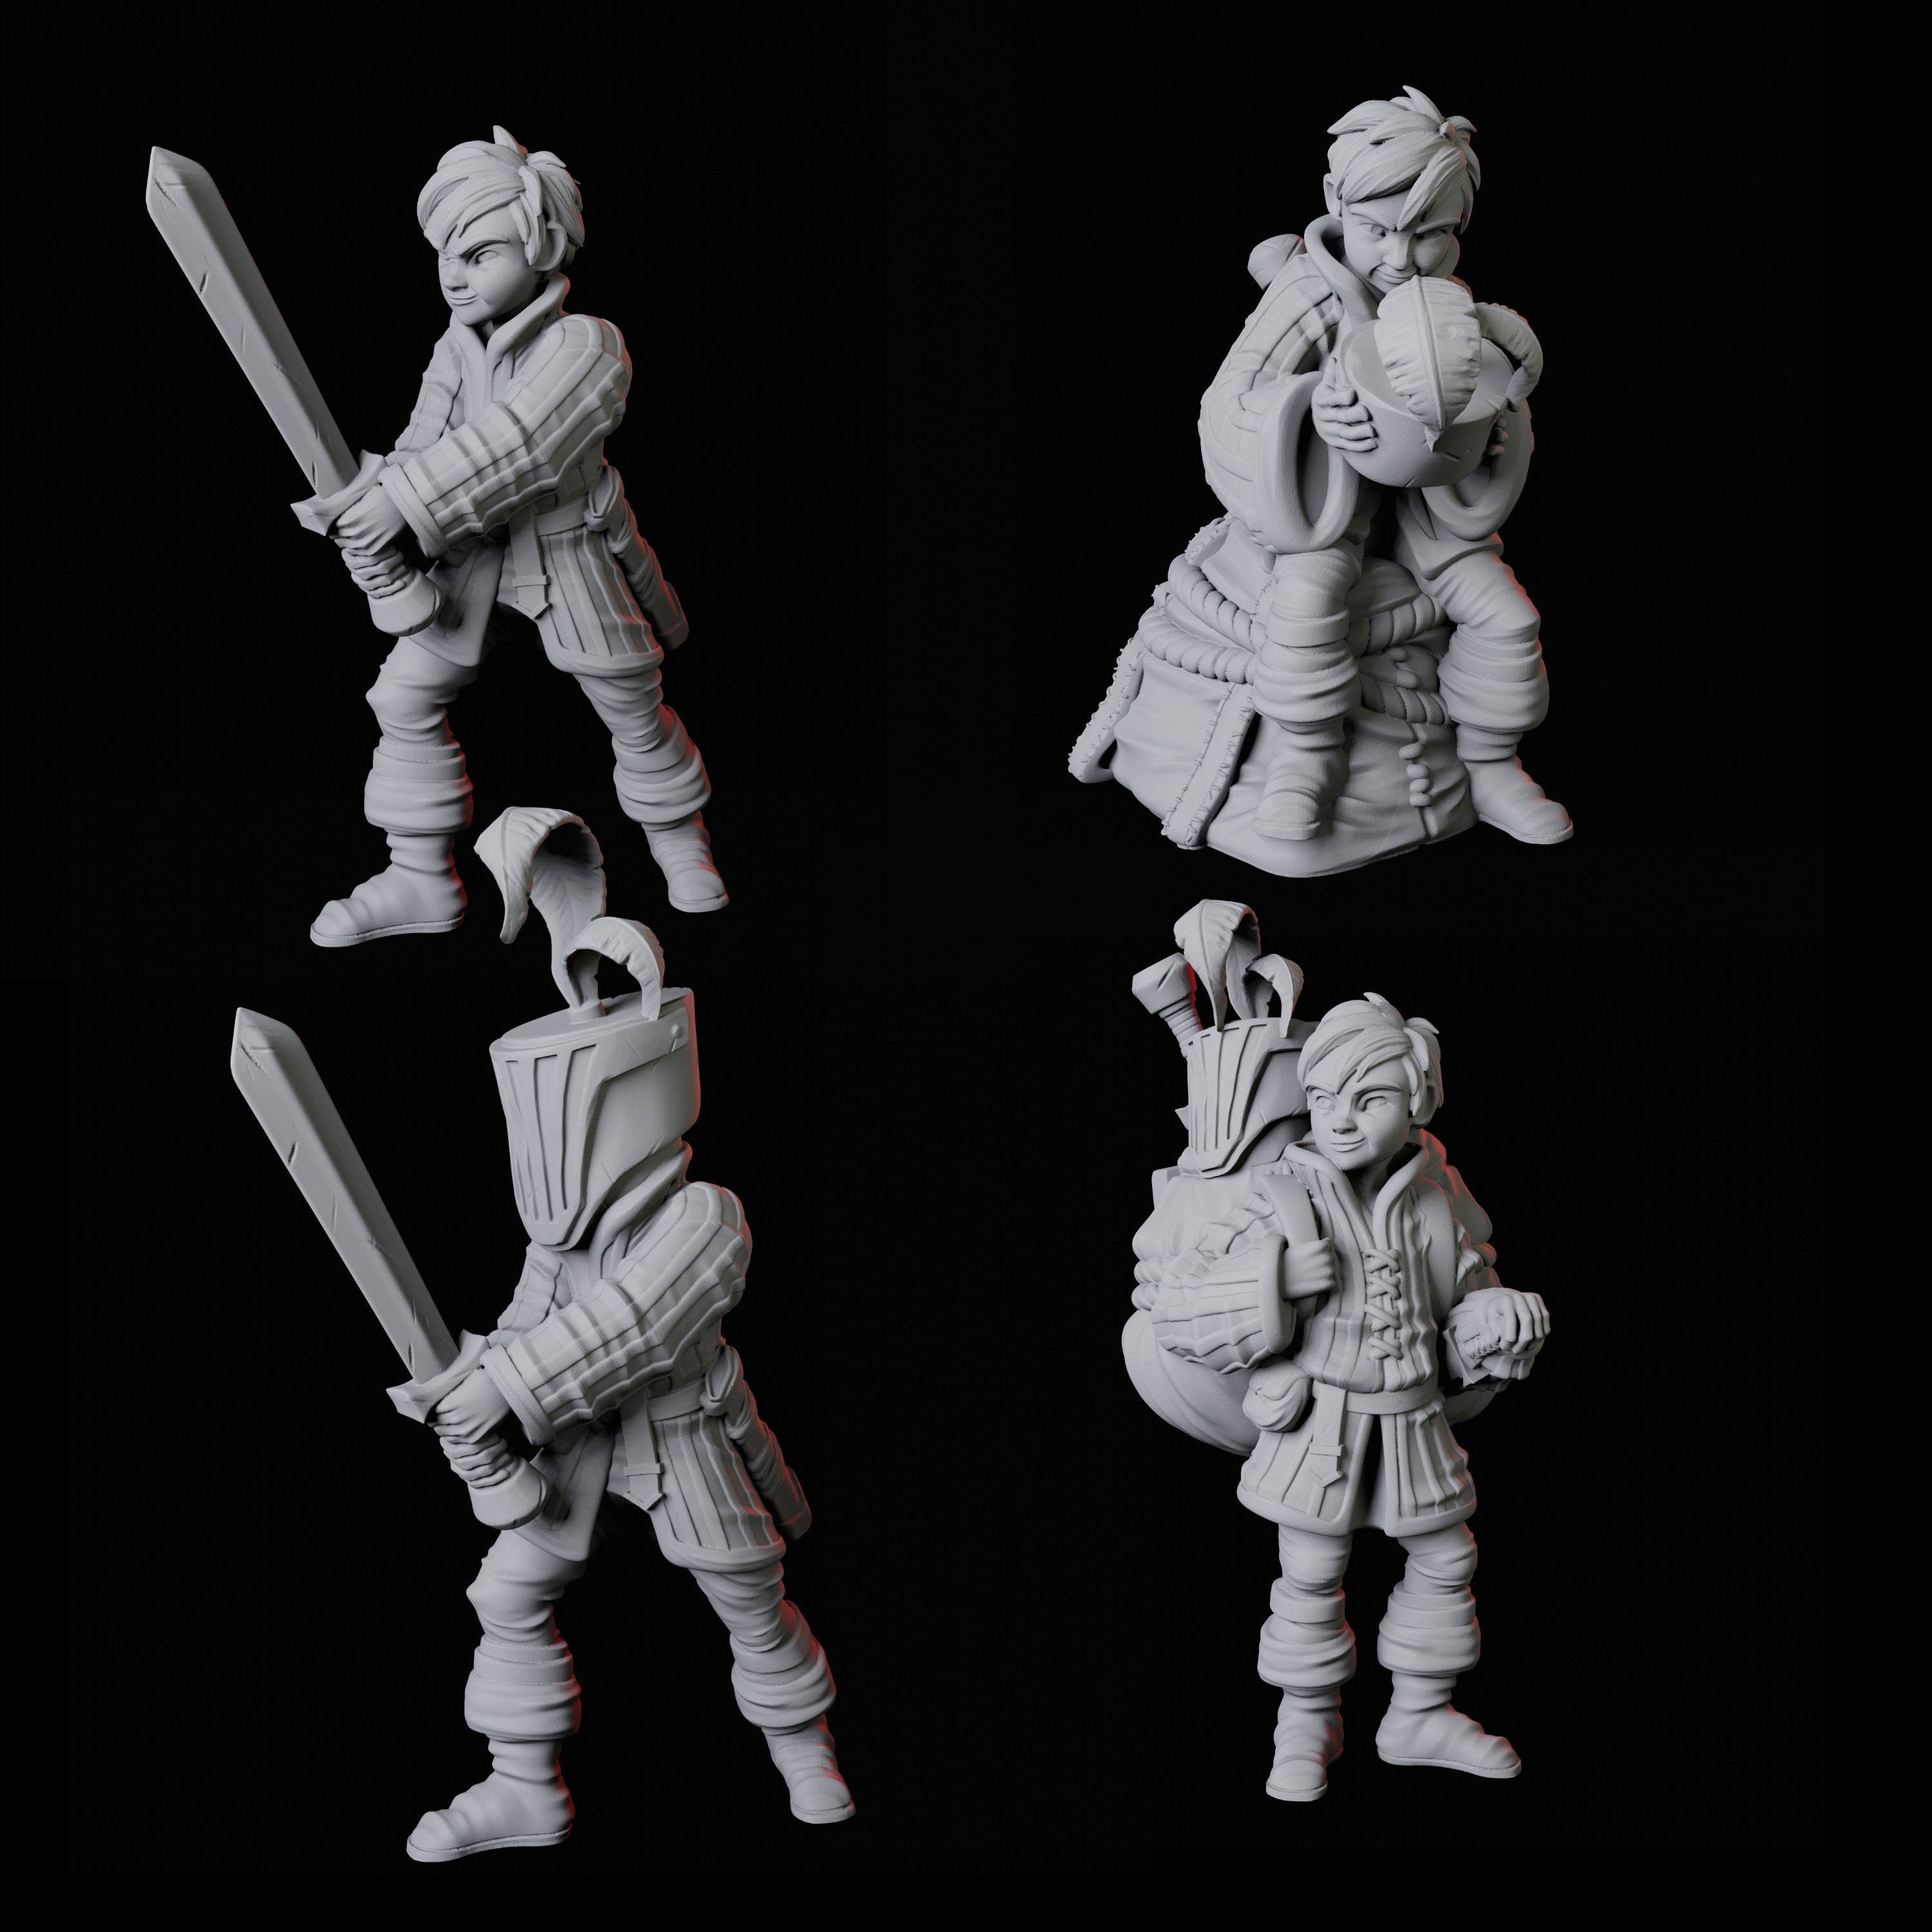 Four Young Squires Miniature for Dungeons and Dragons, Pathfinder or other TTRPGs